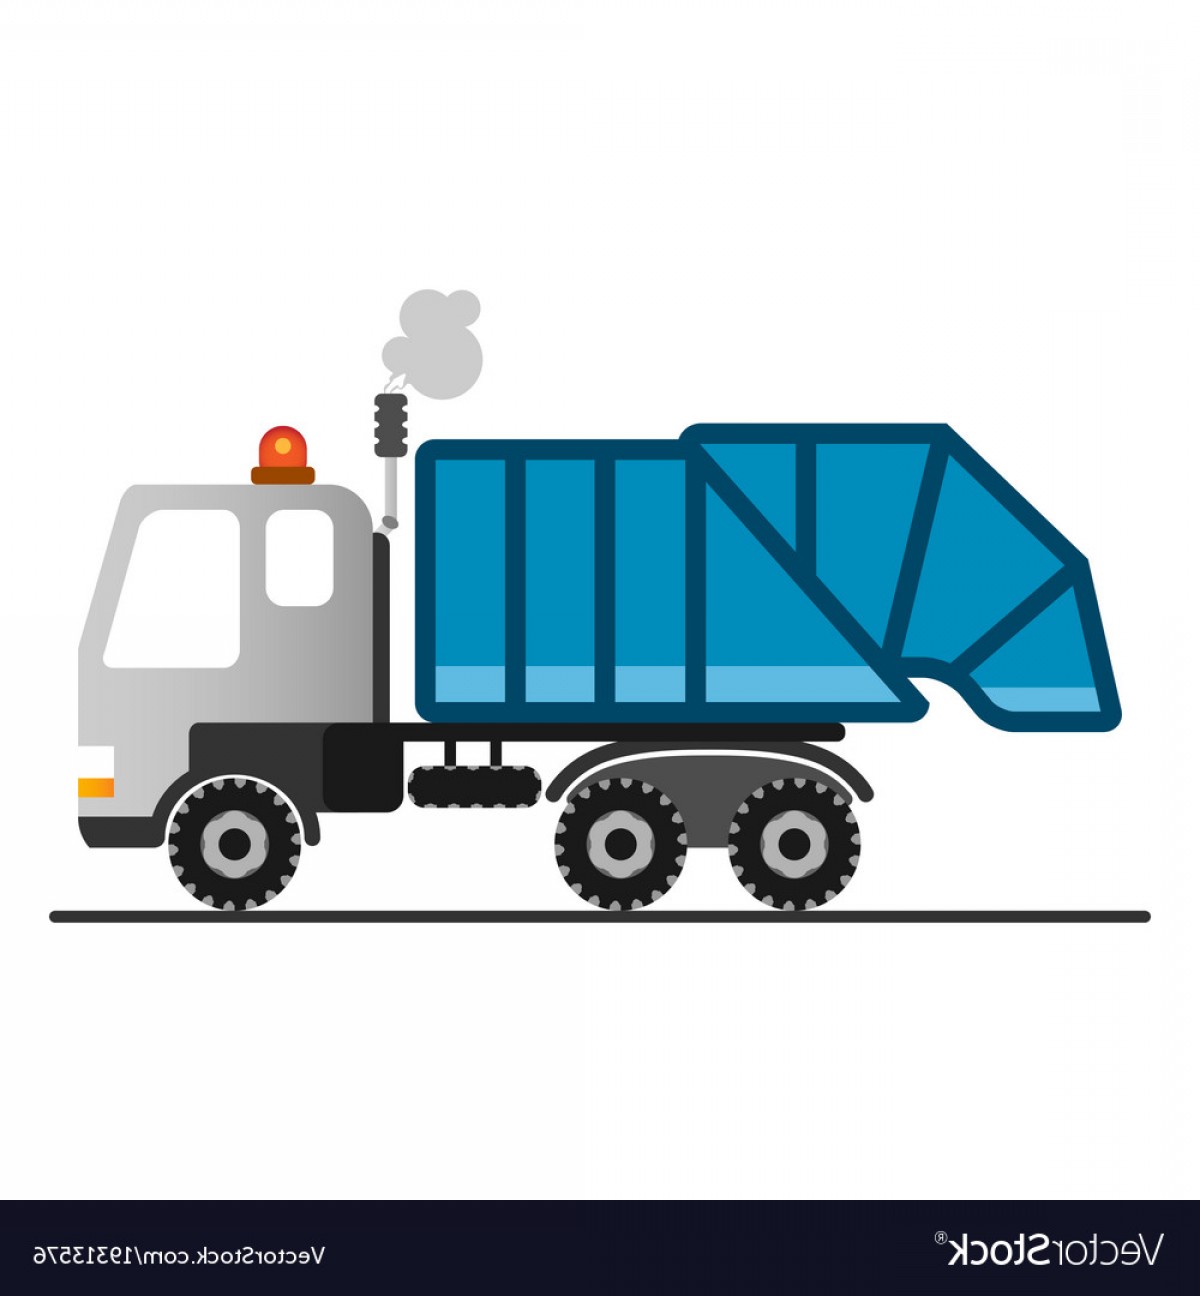 How To Draw A Garbage Truck - YouTube